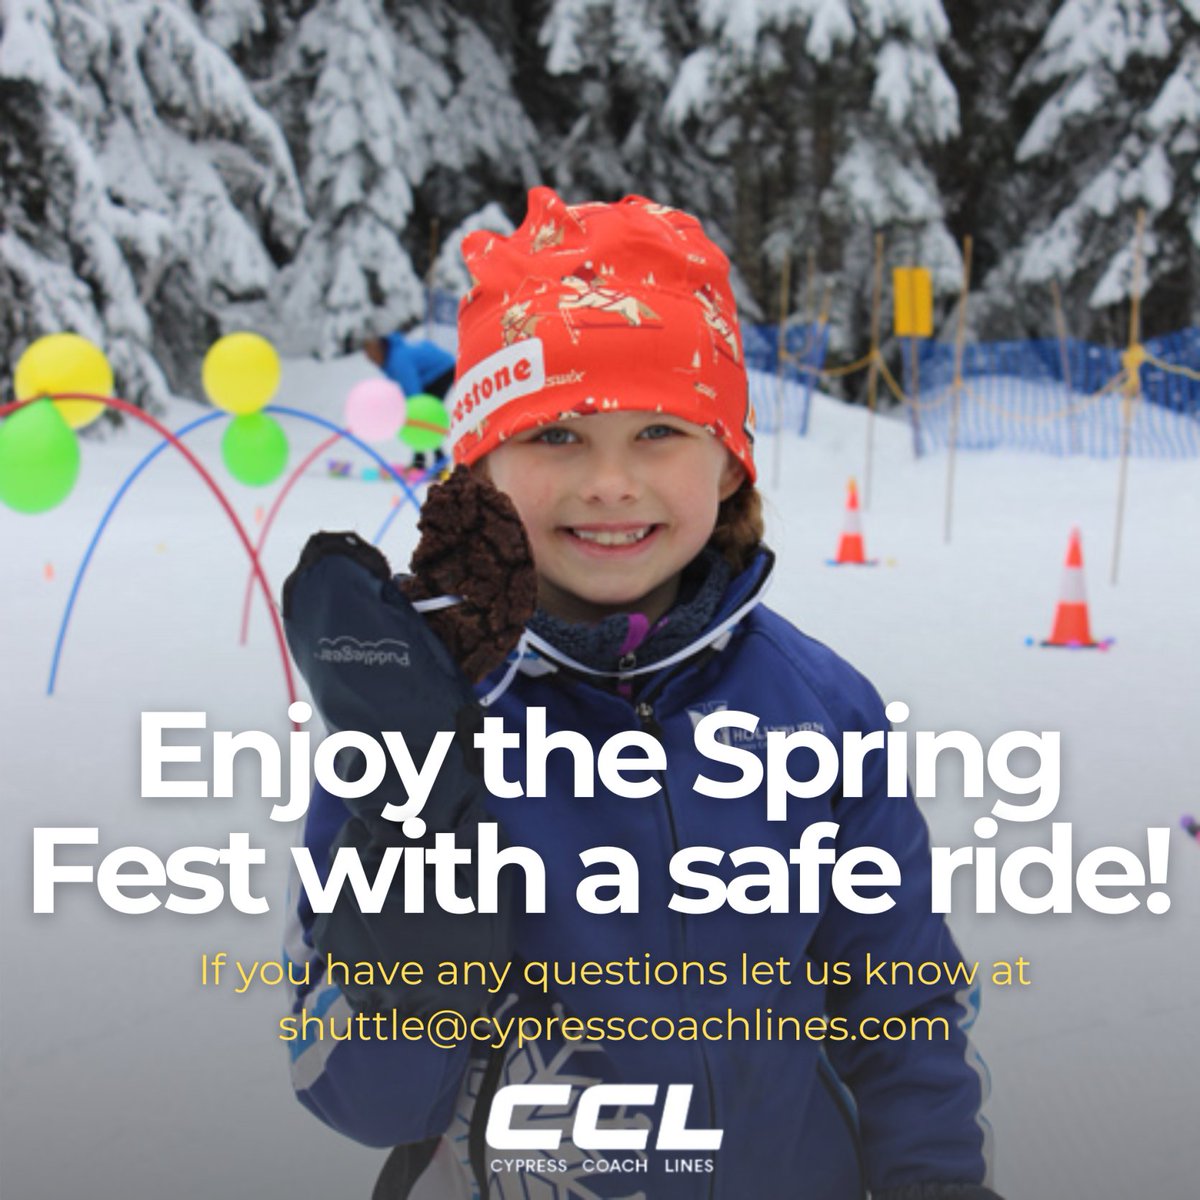 Join us for the Spring Fest on April 7th! Book your tickets with #CypressCoachLines and get ready to have fun🌸🥳

 BOOK ONLINE TODAY! bit.ly/3Inqoyw

#cypressmountain #trip #hiking #vancouvertourism #tourism #vancity #bus #bustrip #vancouver #travelsafe #relax #nature